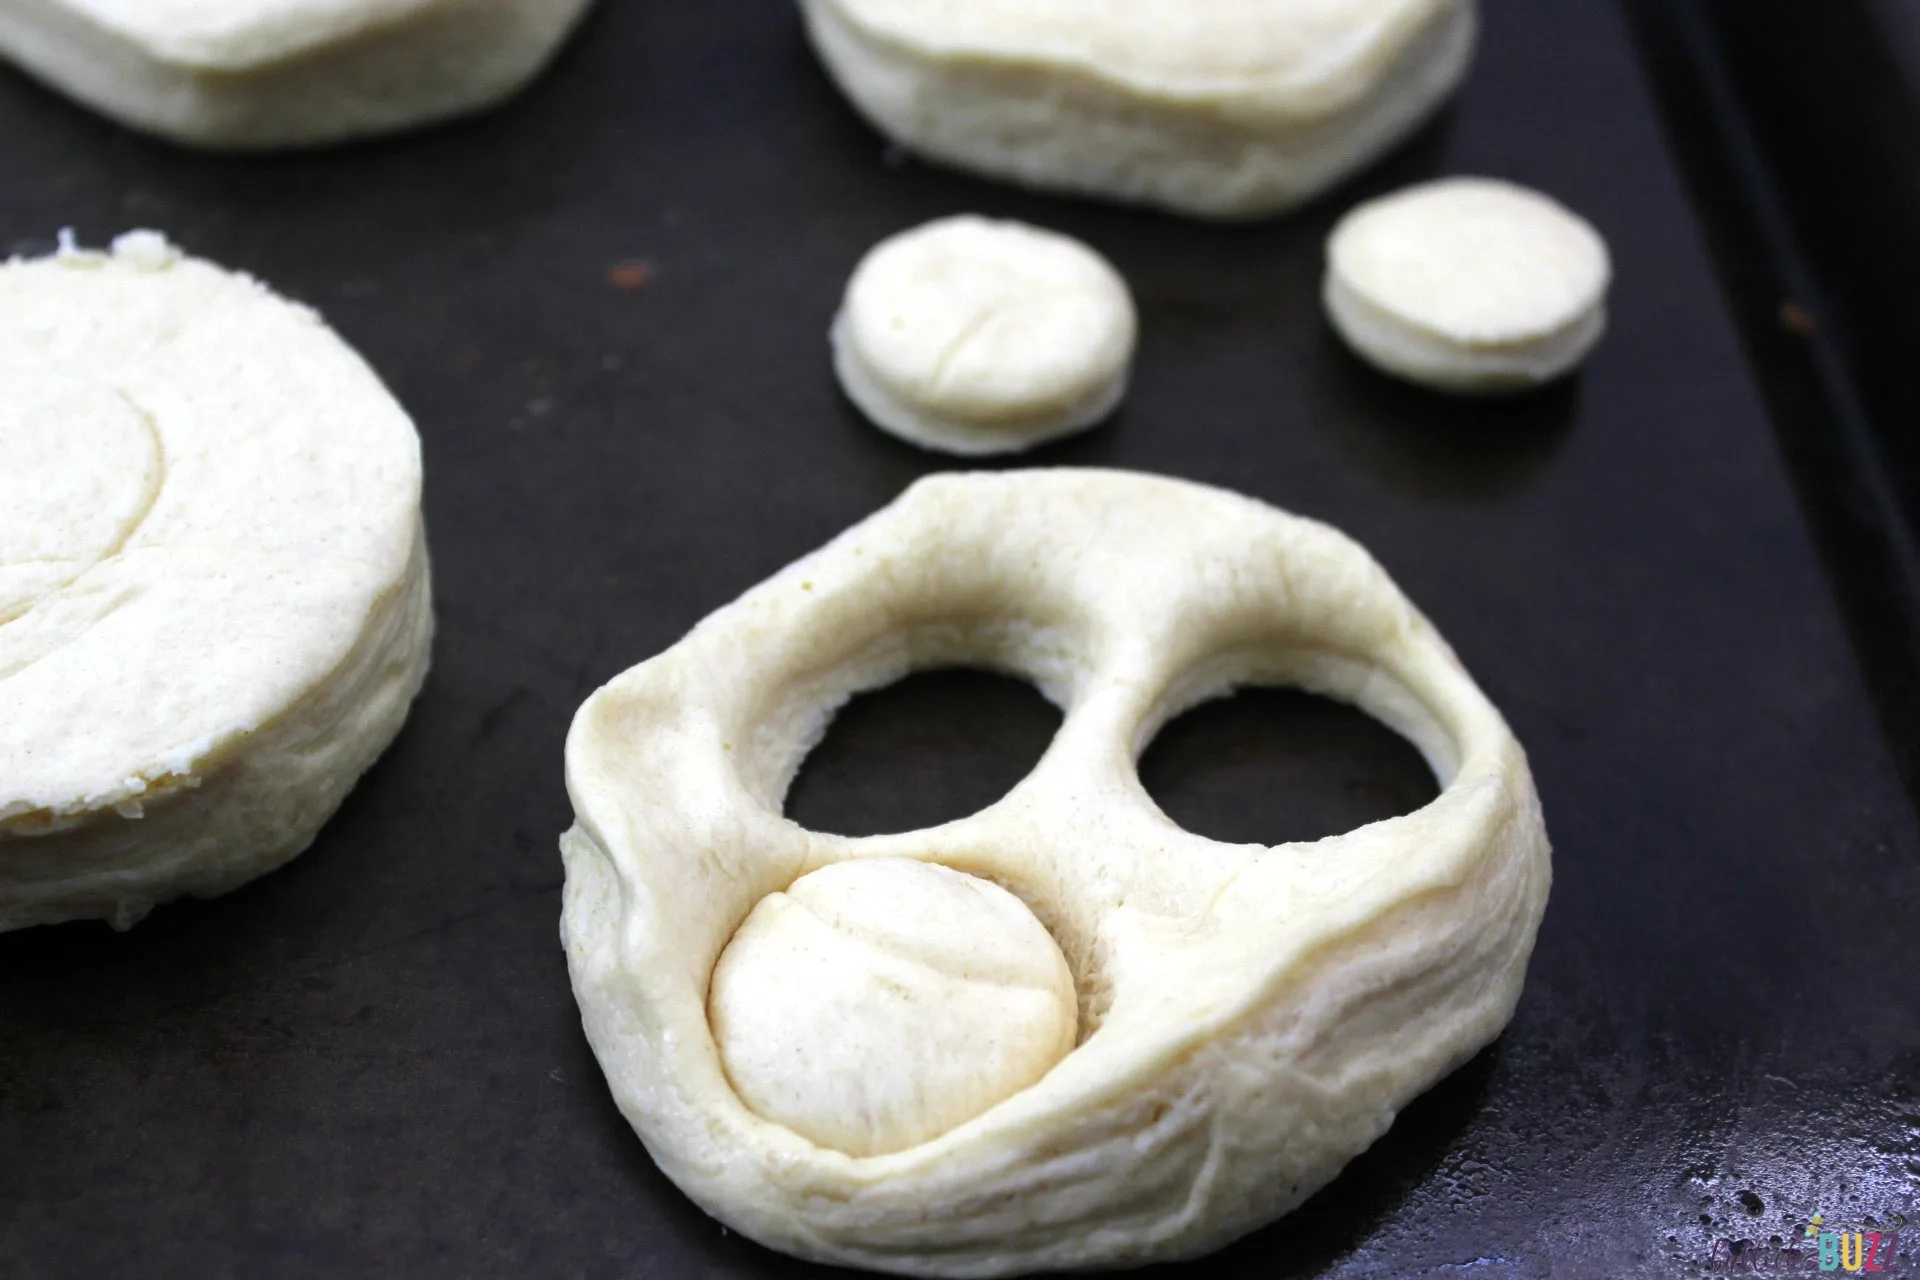 use a 1 inch cookie cutter or bottle cap to punch holes in dough